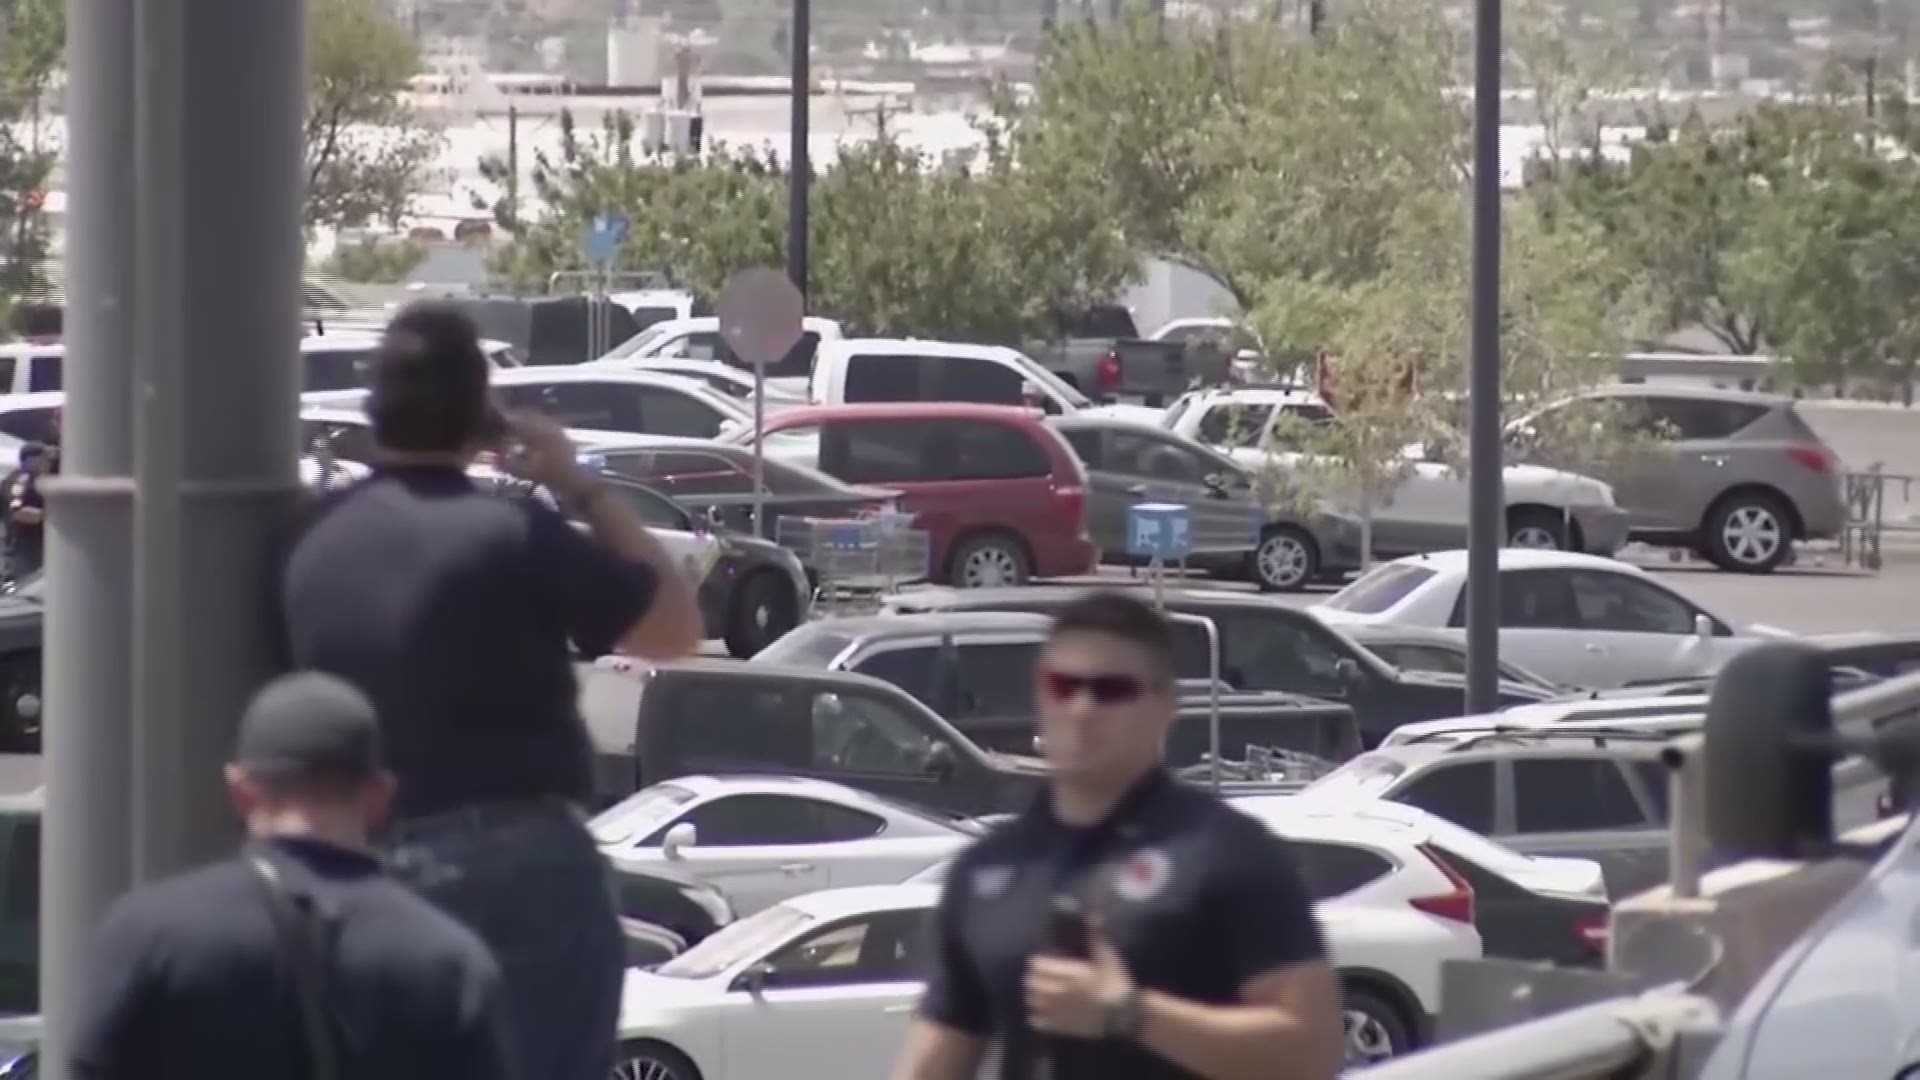 There are multiple victims after a deadly shooting Saturday morning at a mall in El Paso, Texas, and one person is in custody, according to police.